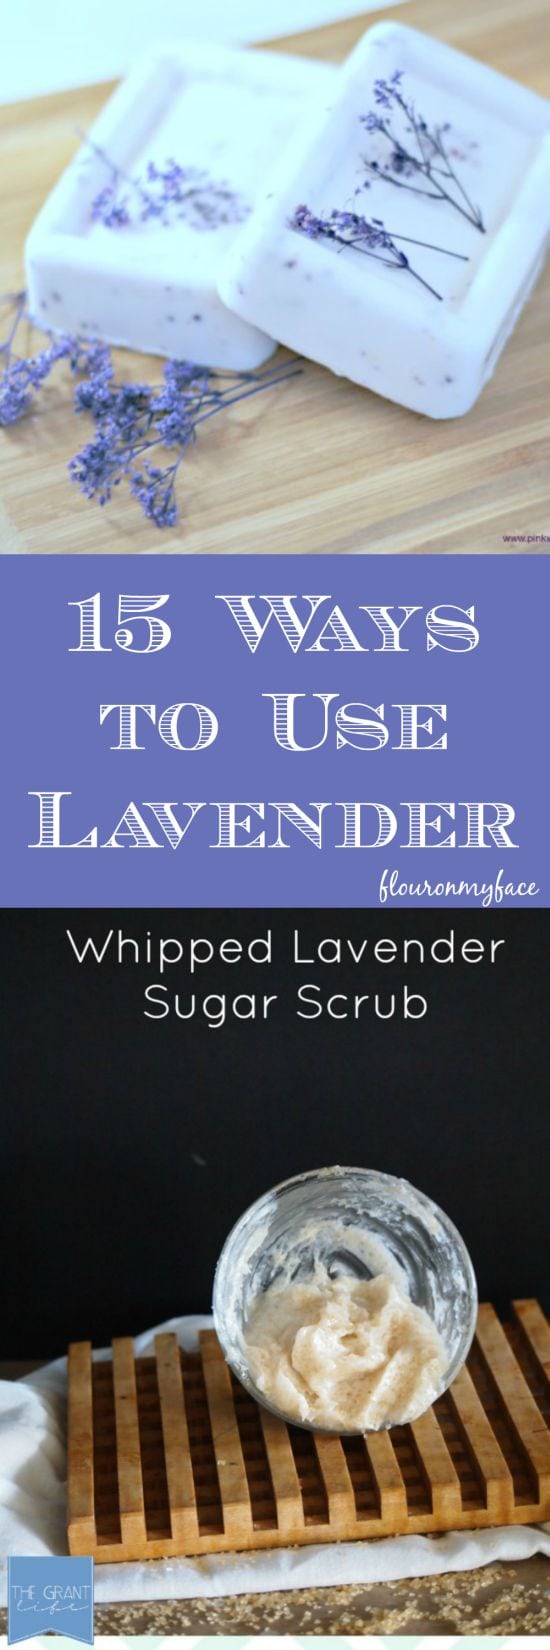 15 Ways to Use Lavender